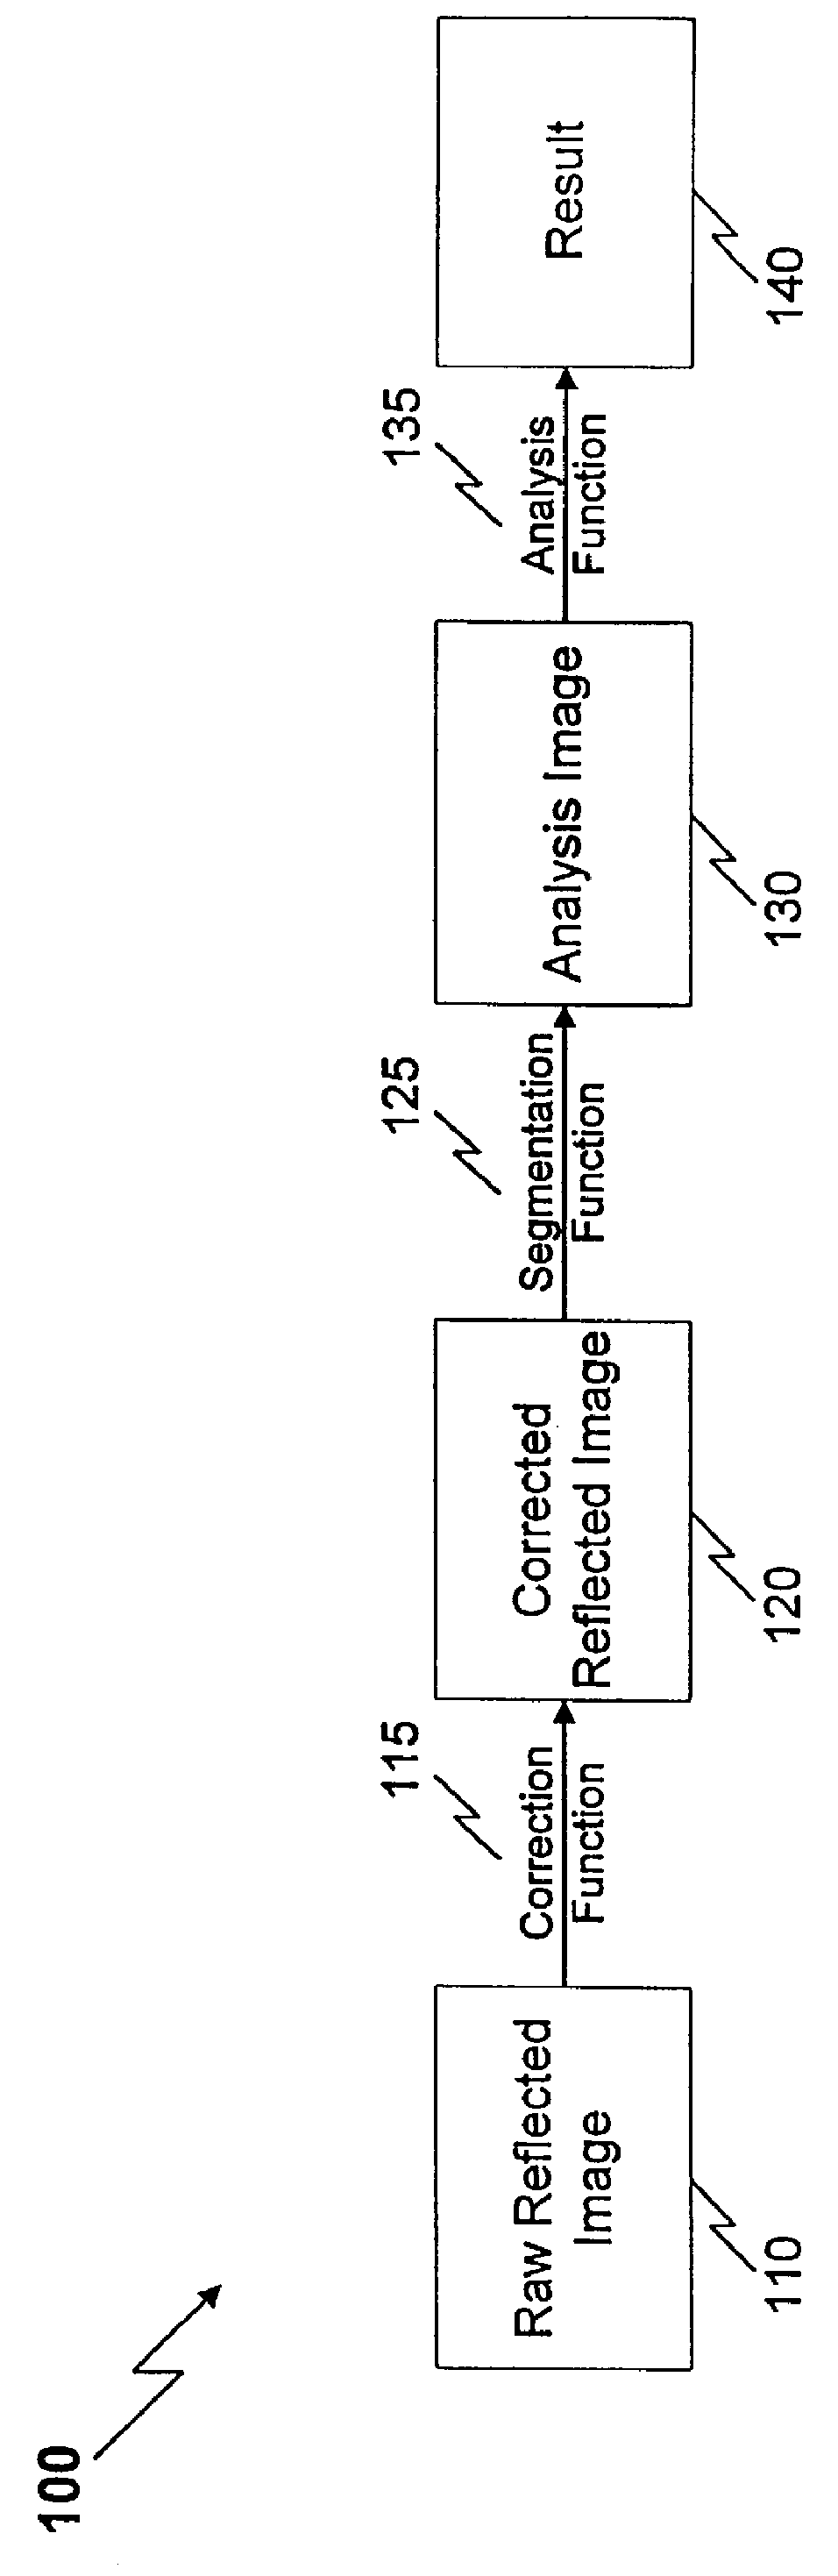 Method and apparatus for reflected imaging analysis